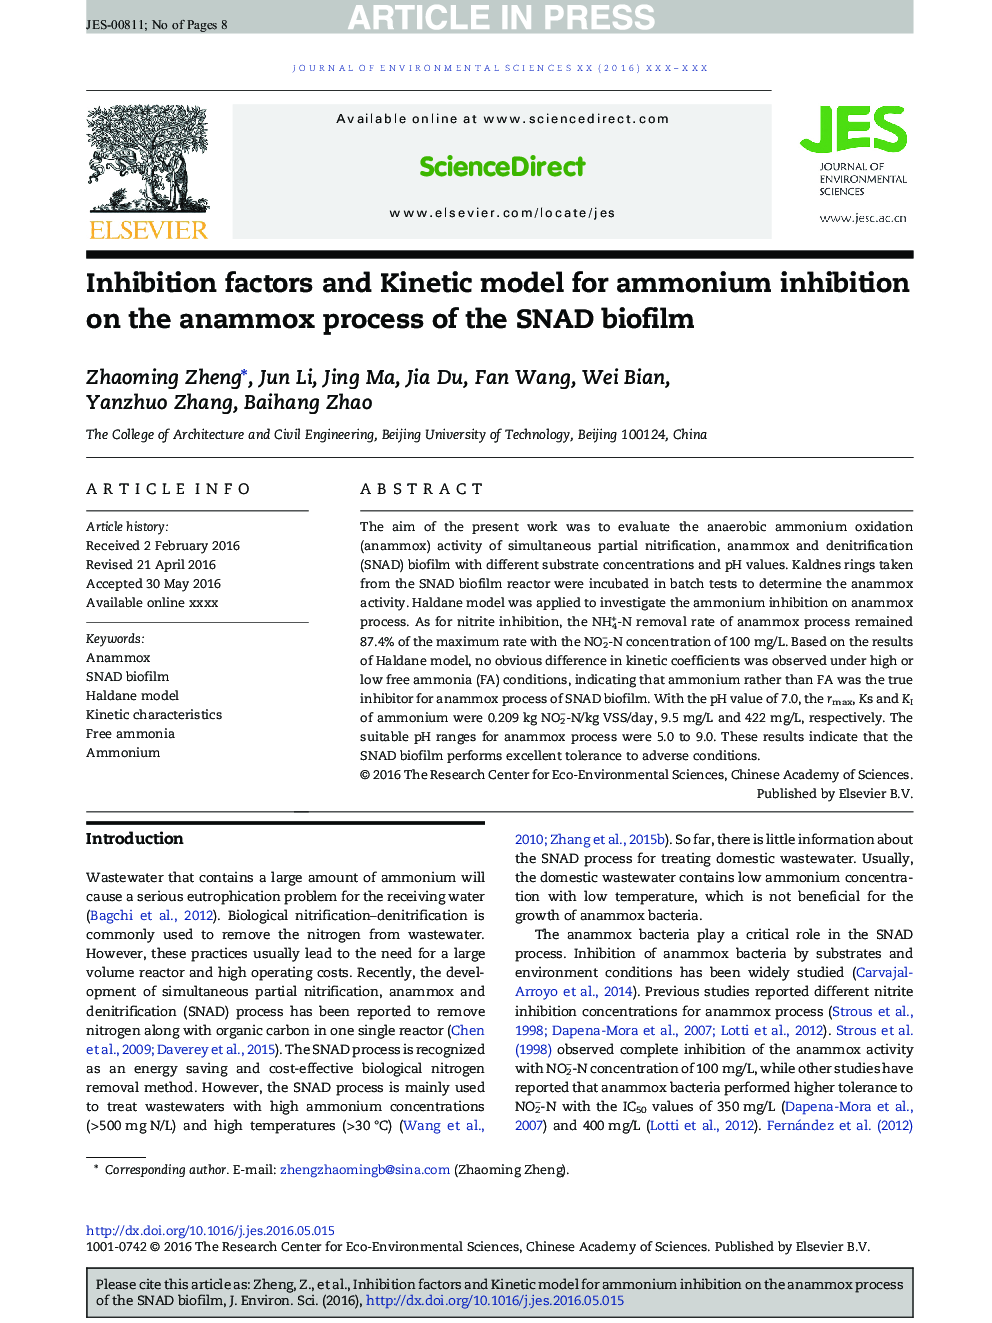 Inhibition factors and Kinetic model for ammonium inhibition on the anammox process of the SNAD biofilm